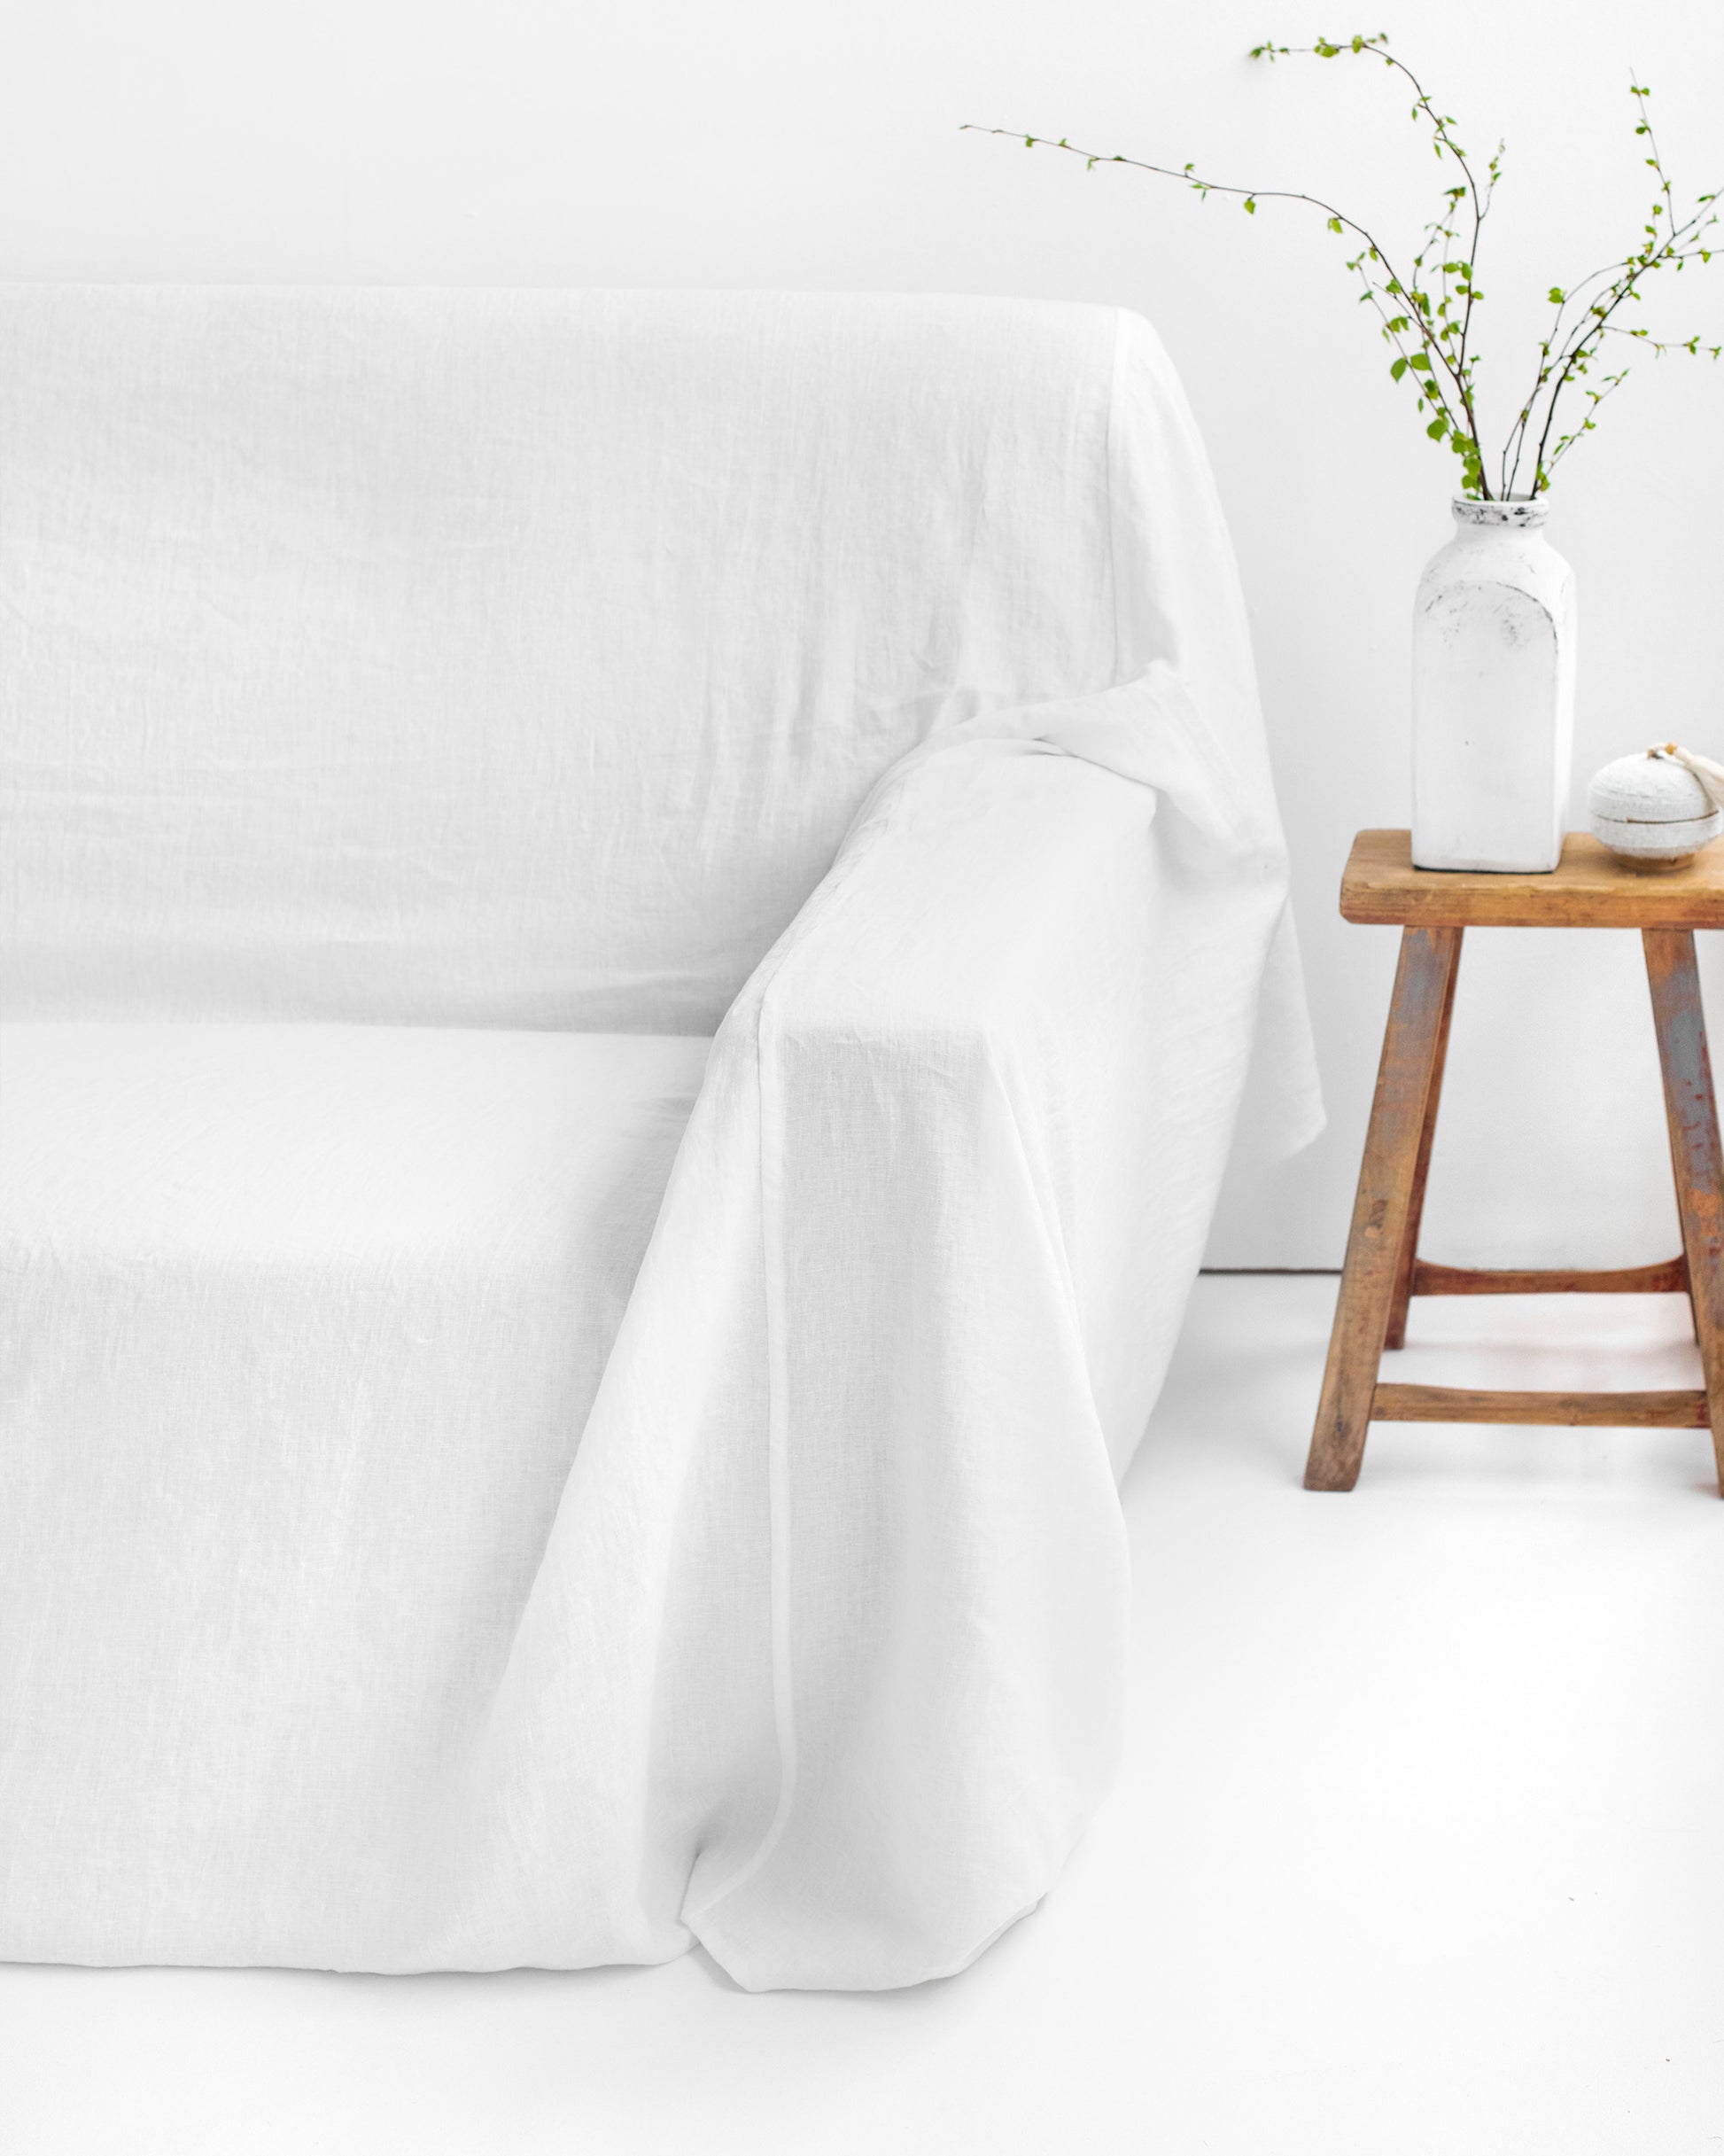 Linen couch cover in White - MagicLinen